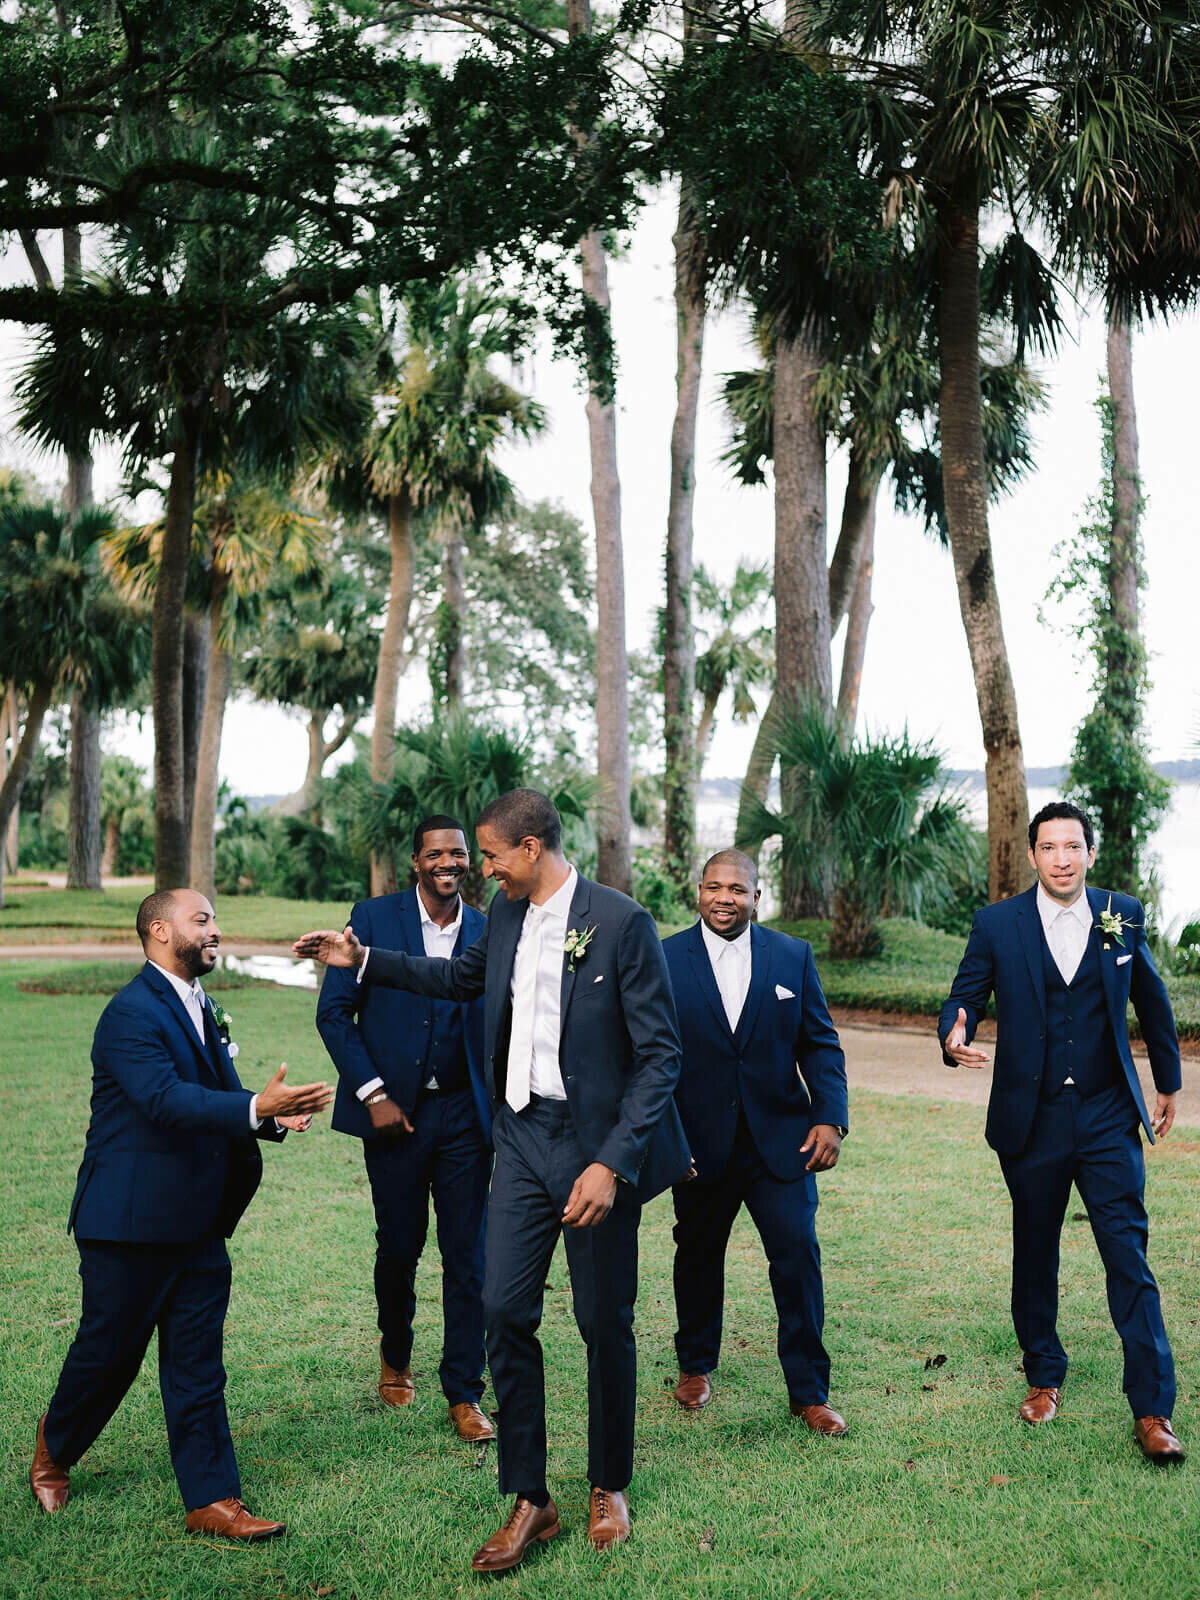 The groom and groomsmen are happily walking in the beautiful garden of Montage at Palmetto Bluff. Destination wedding image by Jenny Fu Studio